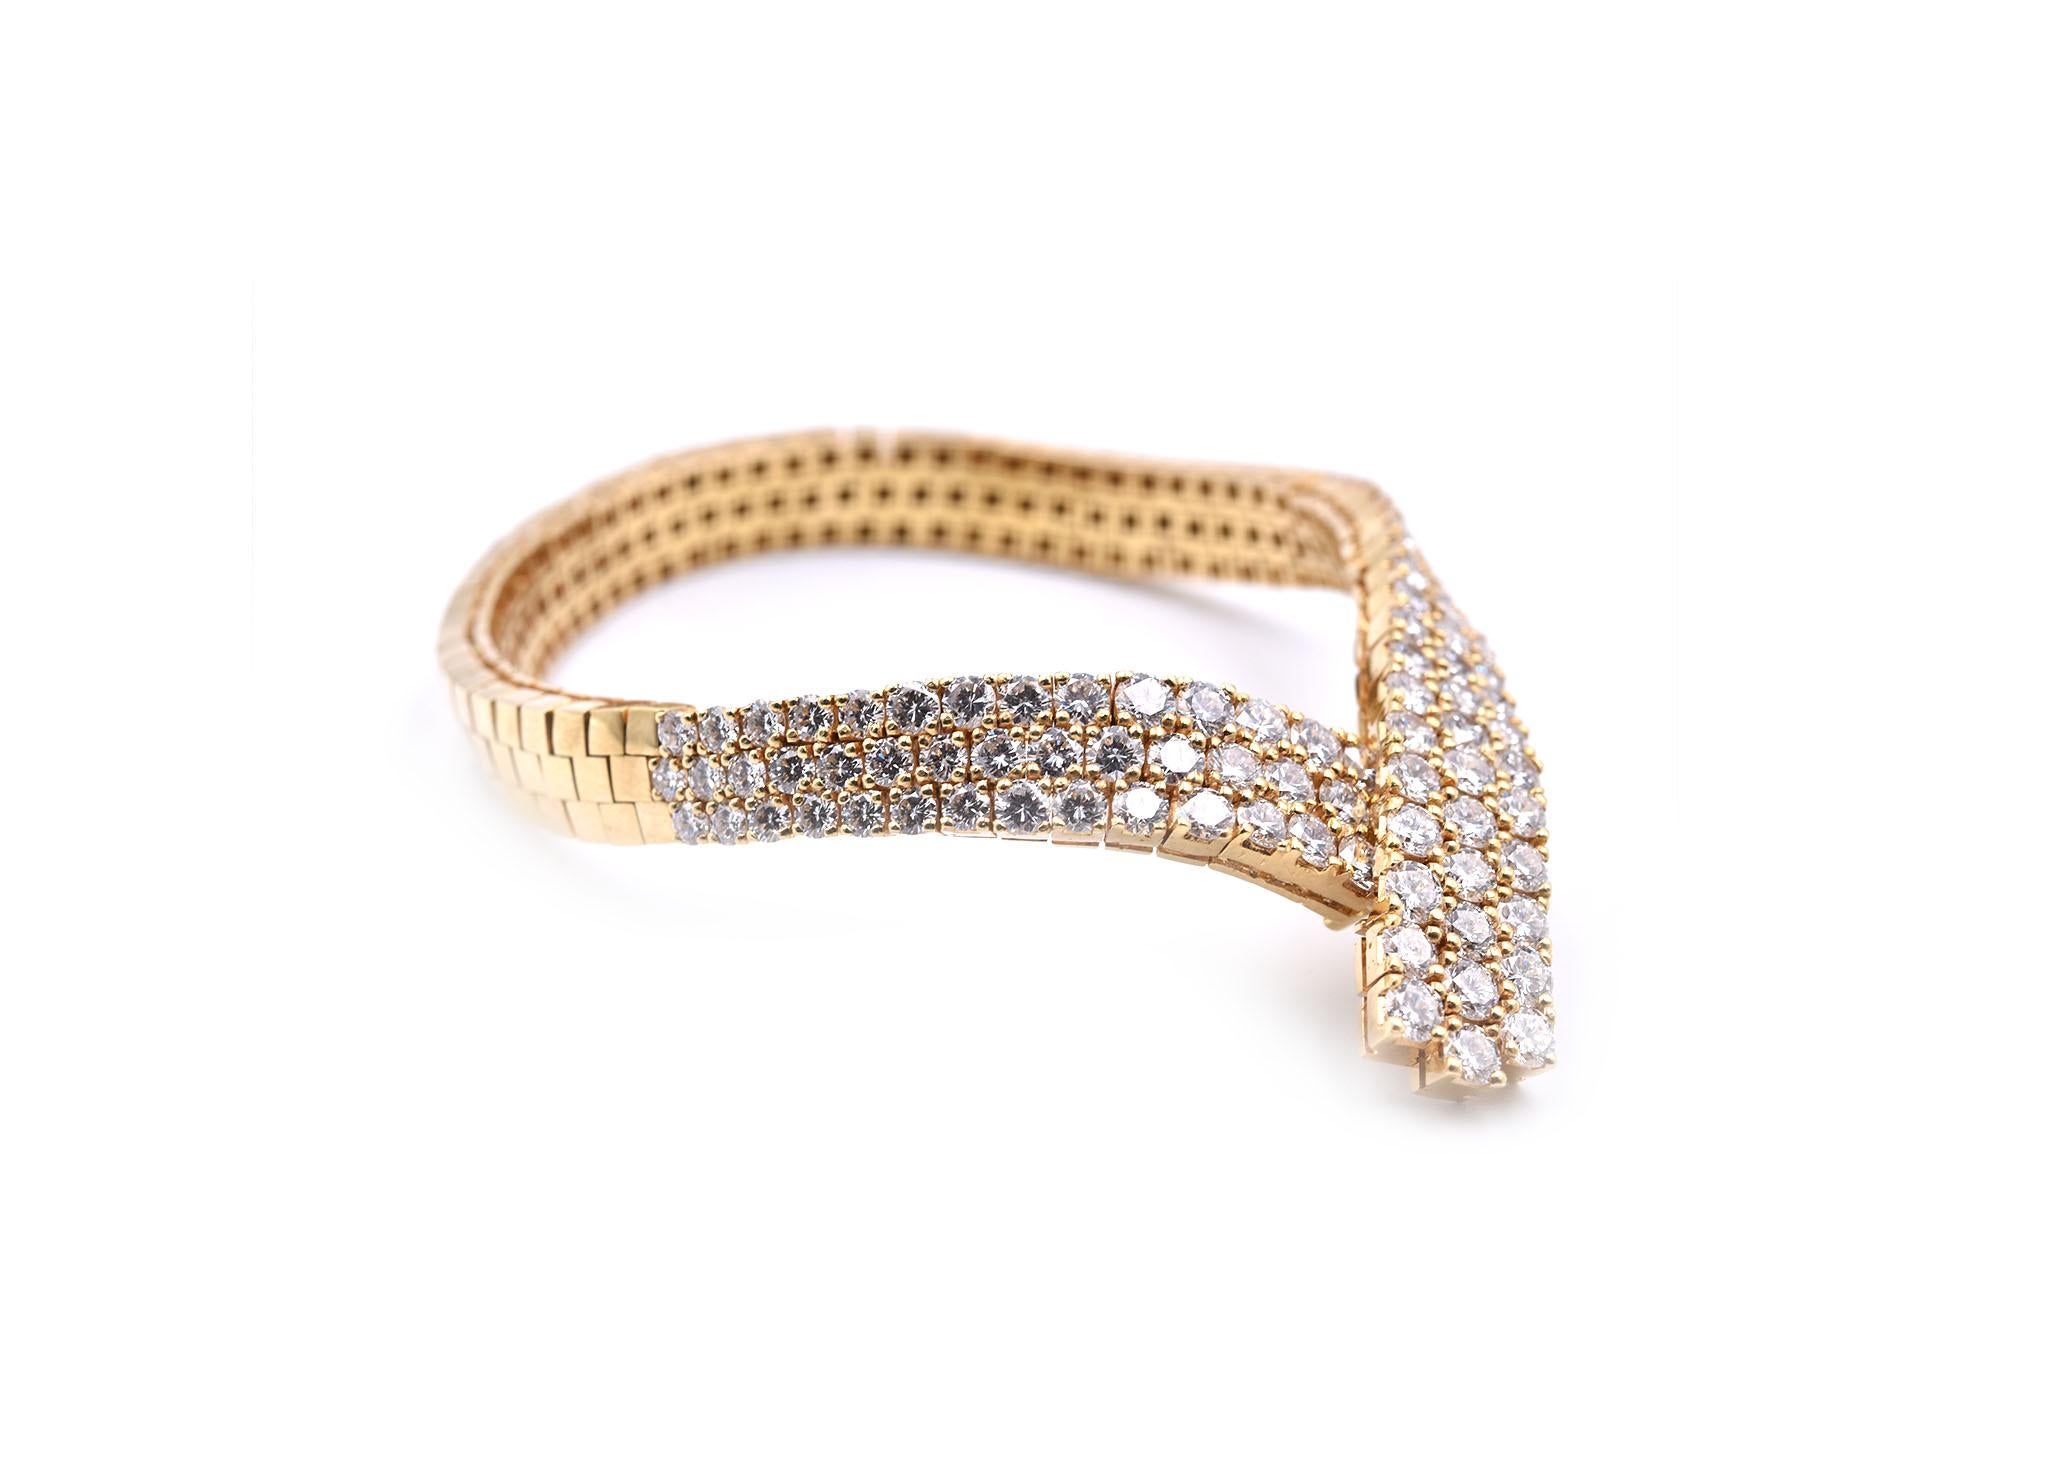 Designer: custom design
Material: 18k yellow gold
Diamonds: 98 round brilliant cut = 10.05cttw
Color: G
Clarity: VS
Dimensions: bracelet is 8-inch long and it is 10.40mm wide
Weight: 51.33 grams